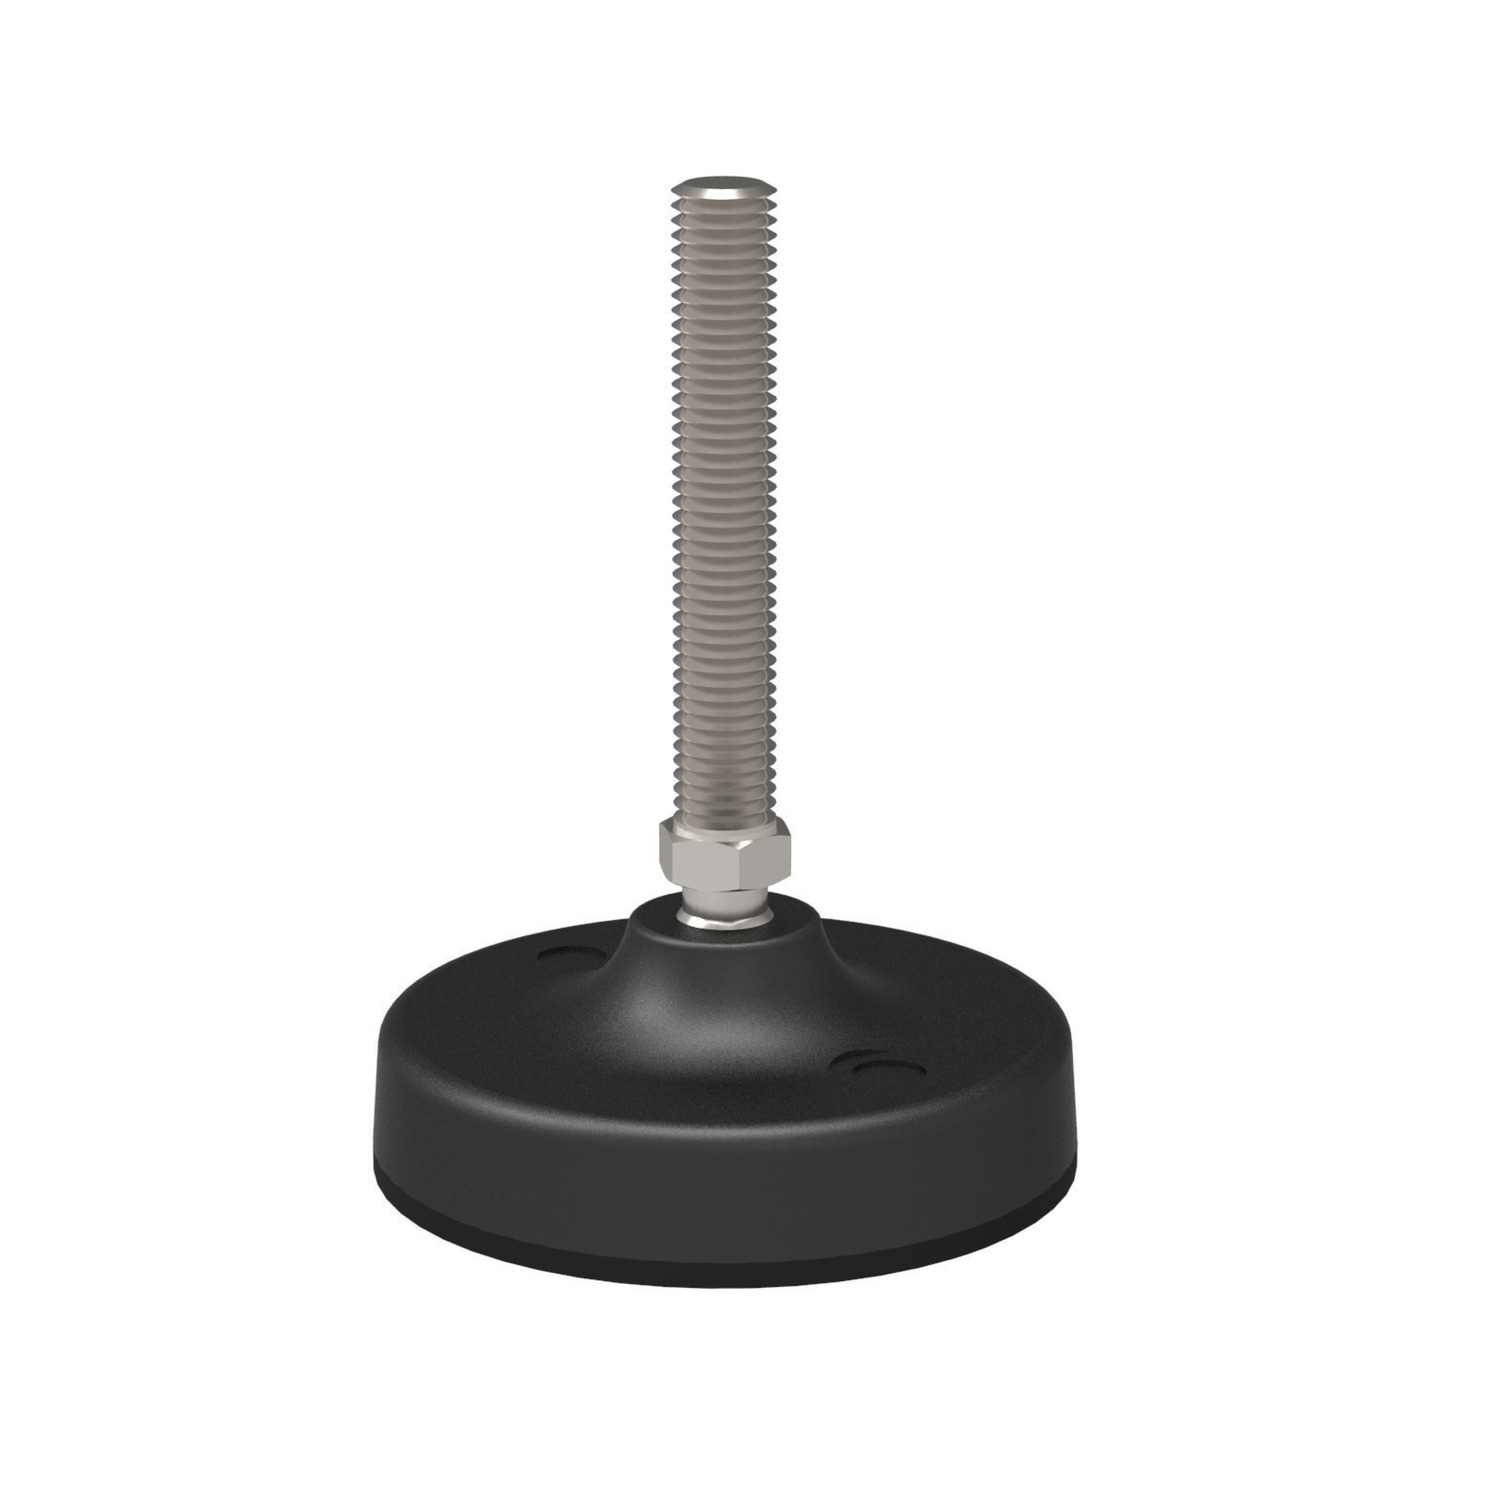 Plastic Base, Stainless Thread